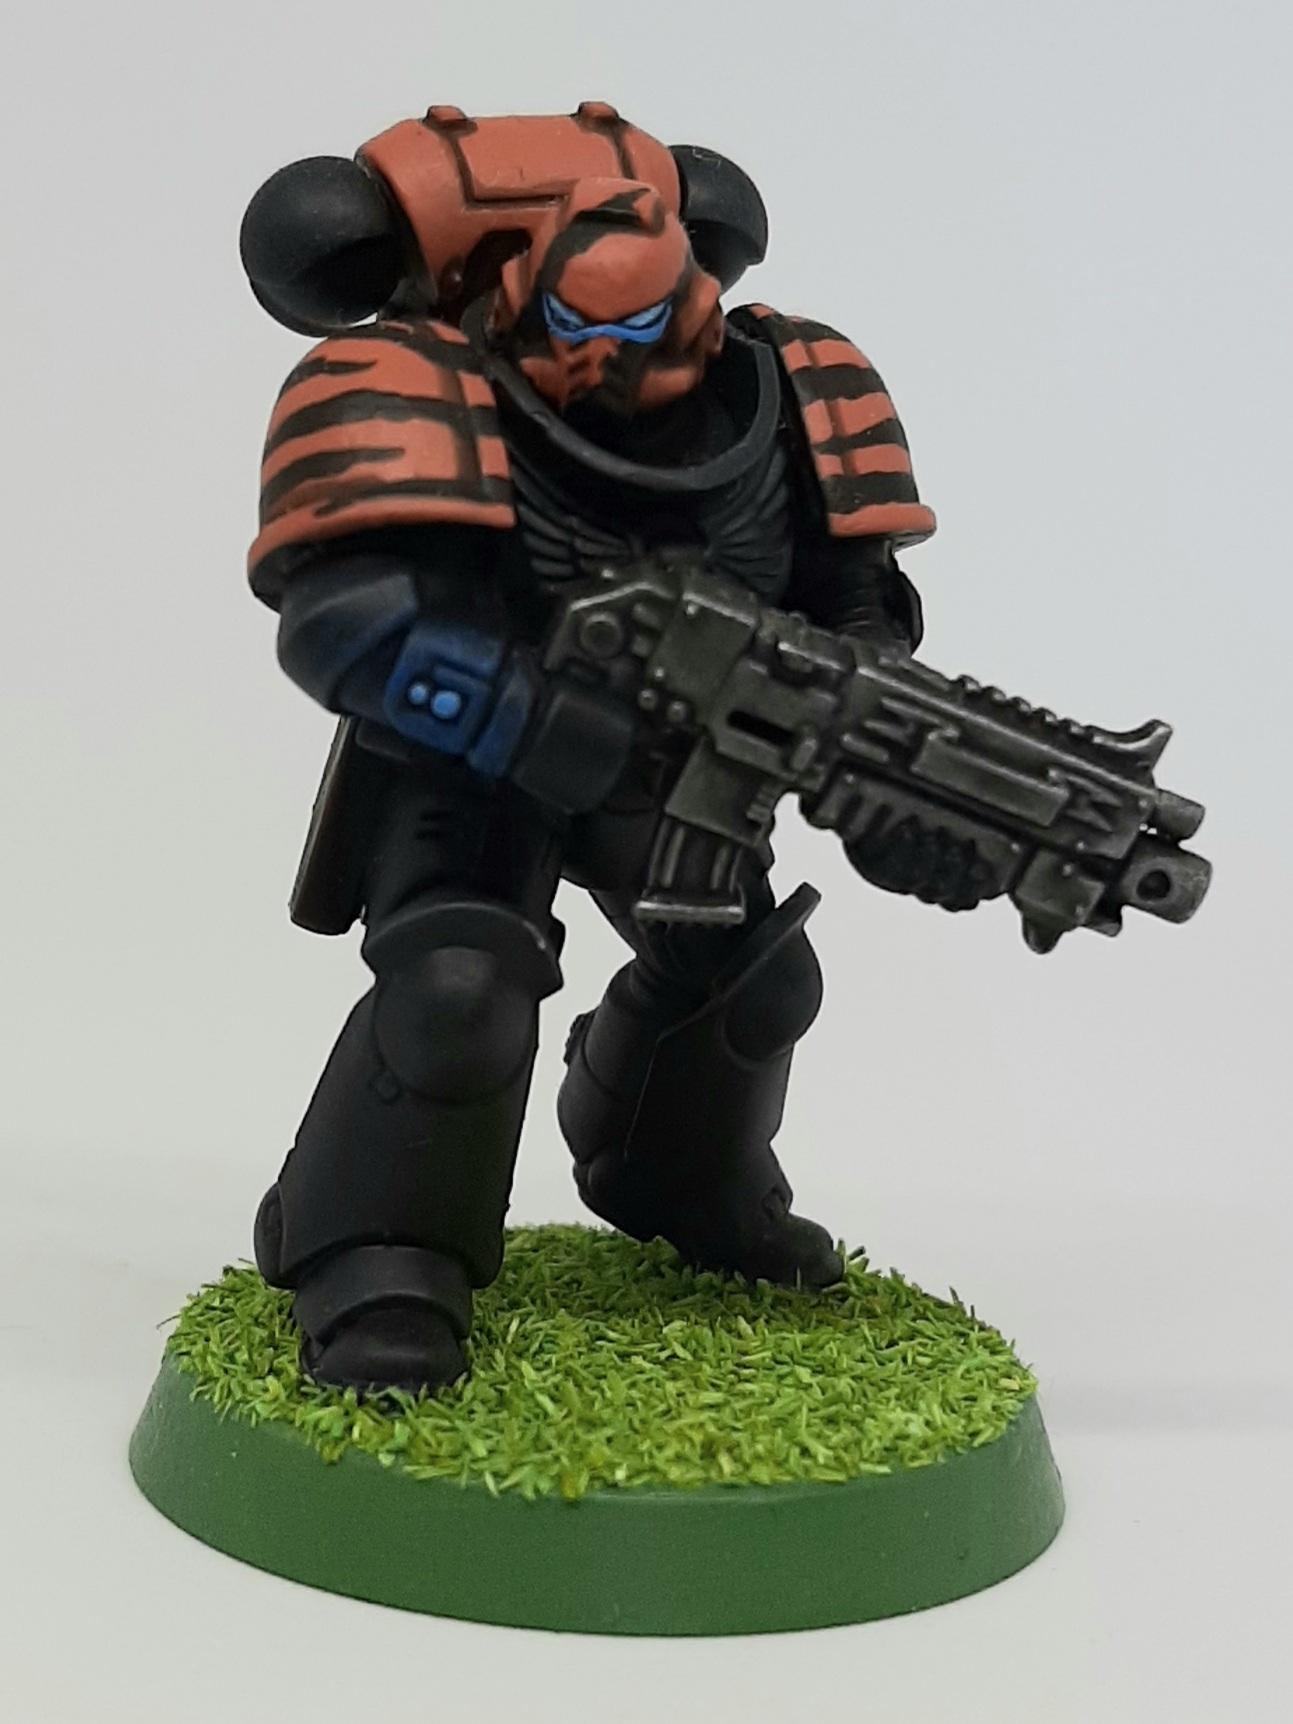 Bolter, Boltgun, Camouflage, Claw, Combat, Fang, Fighting, Forest, India, Intercessors, Jungle, Knife, Patrol, Paw, Pistol, Primaris, Saber, Space, Squad, Stripes, Tigers, Tooth, Veda, Wolf